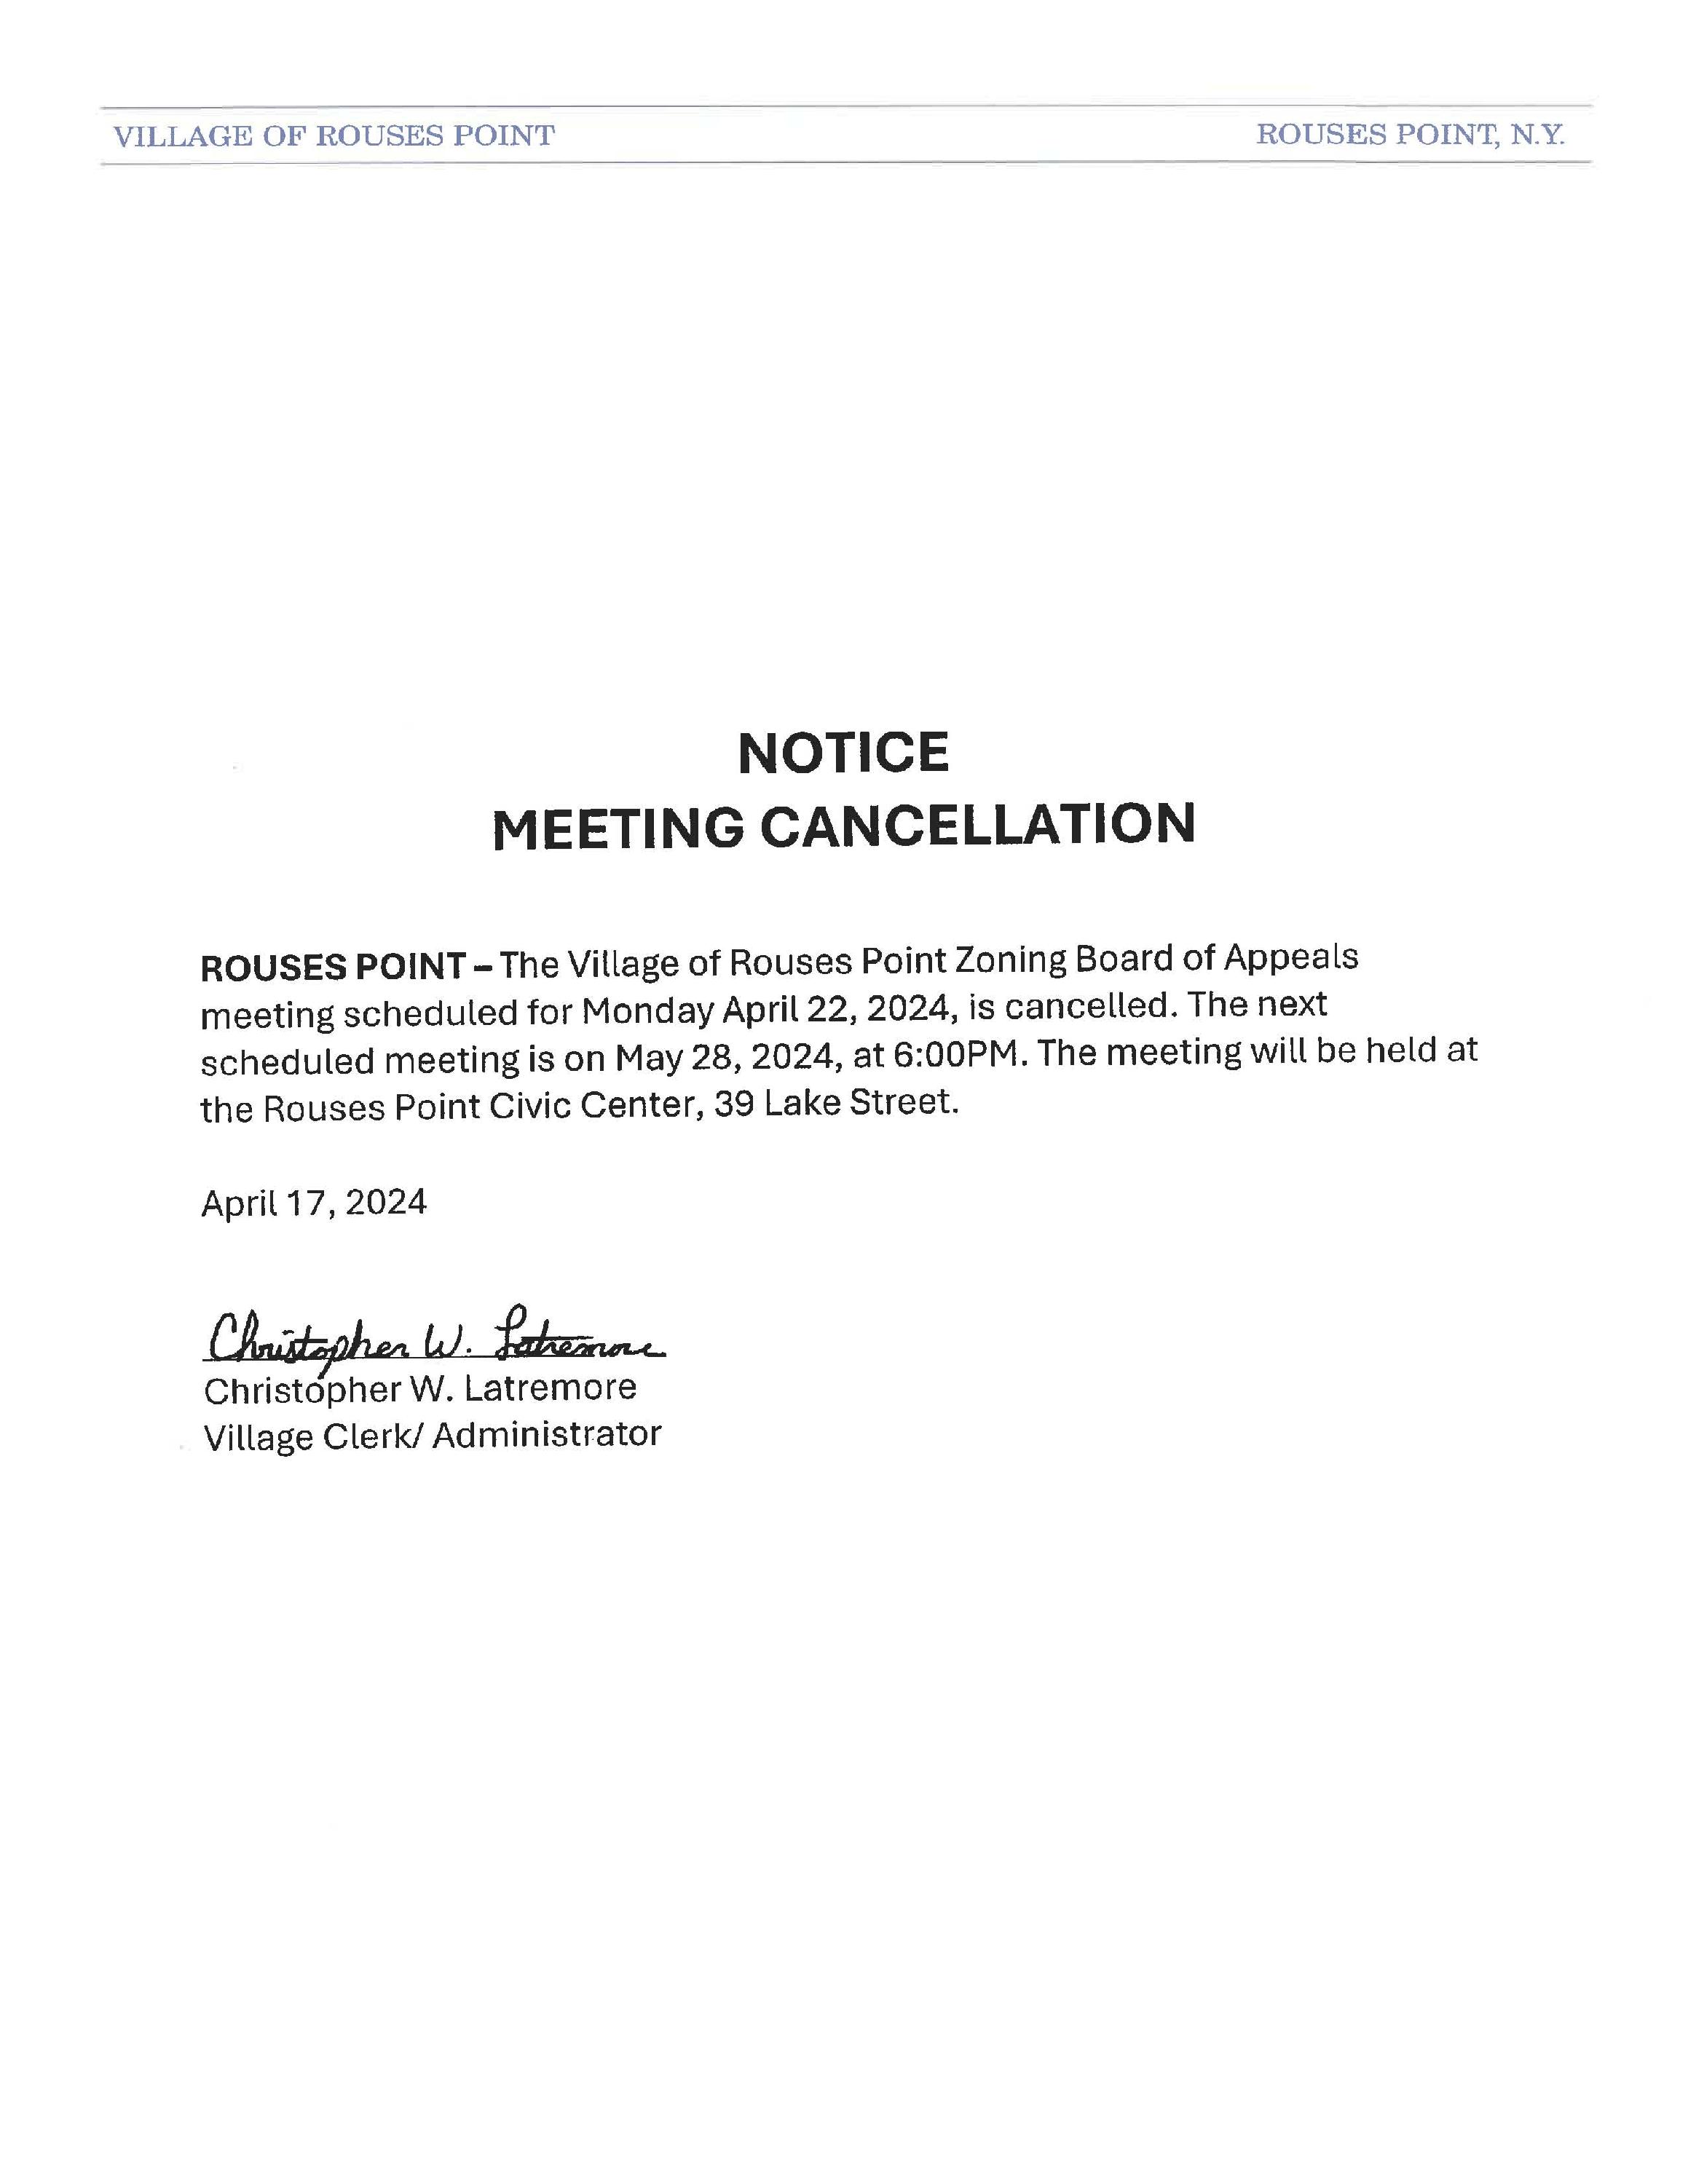 Zoning Bd 4-22-24 Cancelled